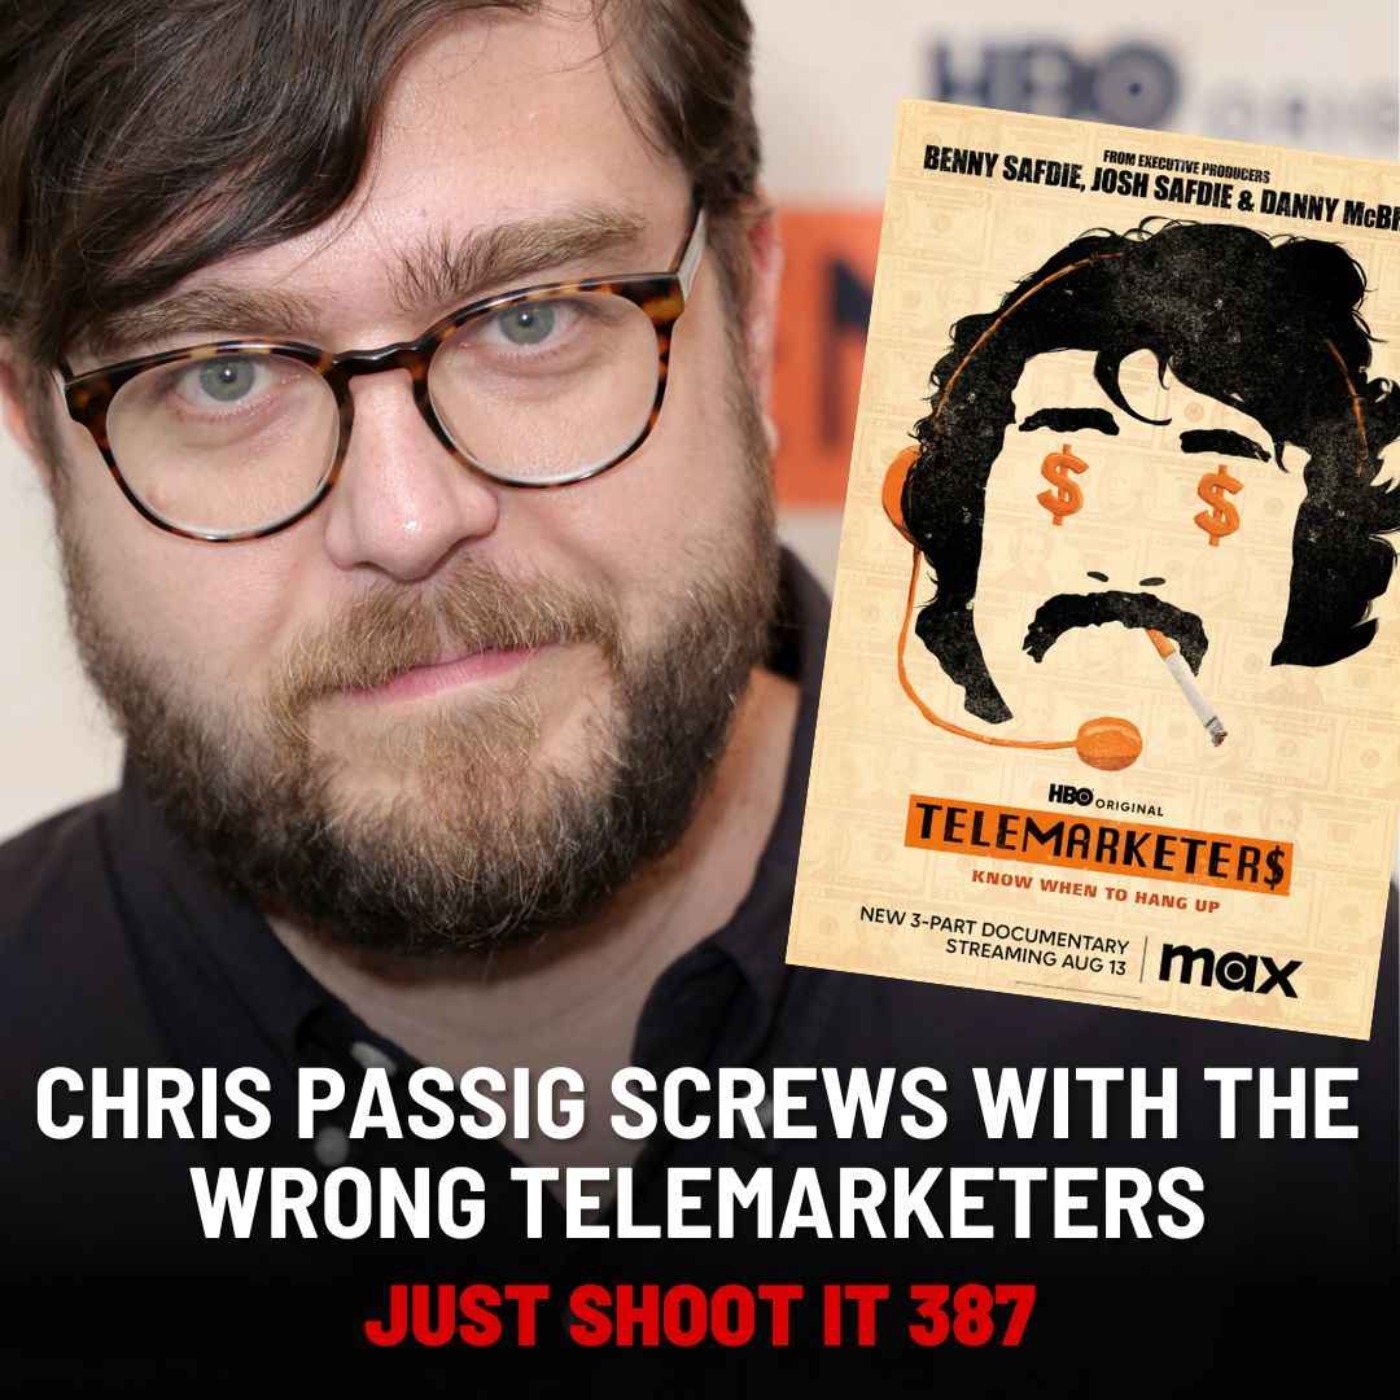 Chris Passig Screws with the Wrong Telemarketers - Just Shoot It 387